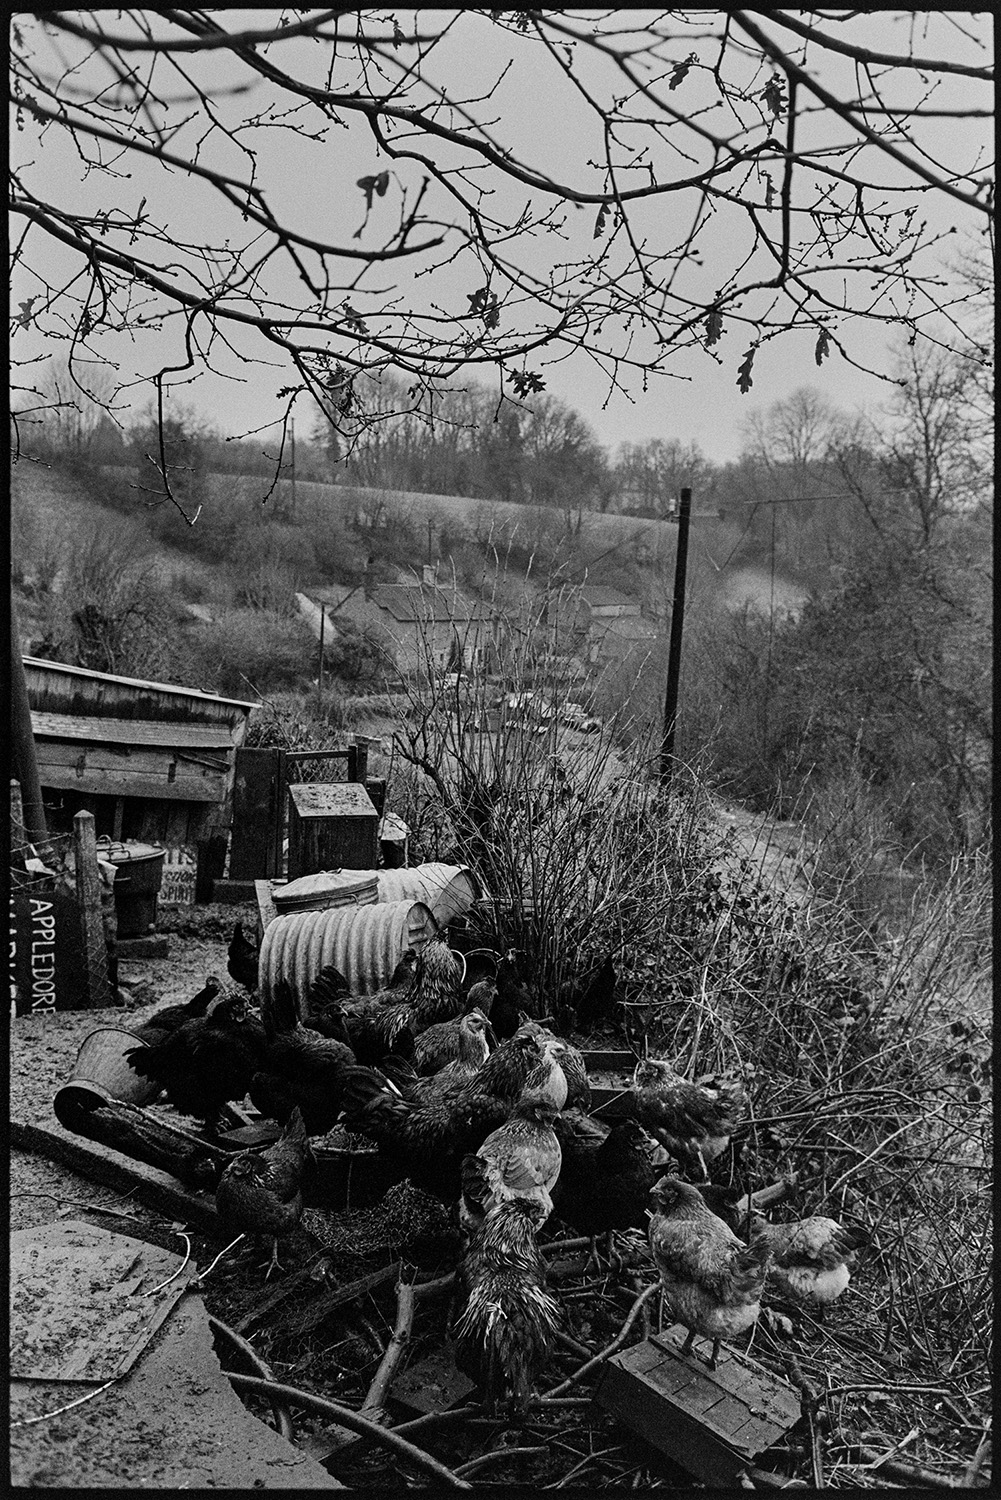 Chickens huddled together in the cold. 
[Chickens huddled together by a hedge to keep warm at Millhams, Dolton. Barrels and a wooden shed are visible in the background.]